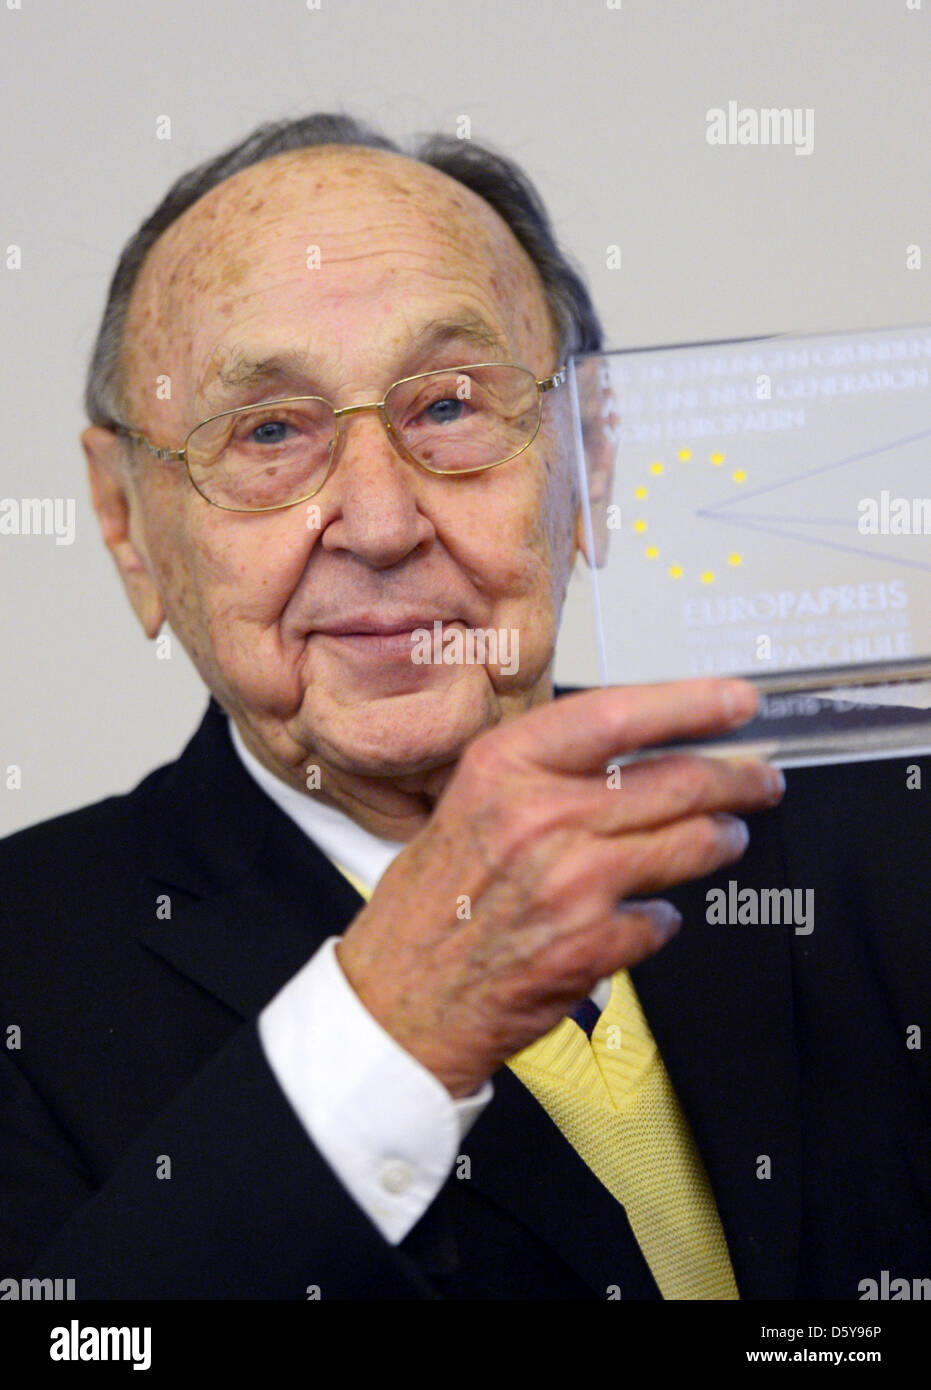 Former German Foreign Minister Hans-Dietrich Genscher reacts after he received the 2012 European School Price by the national network of European schools at the Humboldt University in Berlin, Germany, 19 October 2012. The price is awarded every two years to honor outstanding contributions towards a united Europe. Photo: RAINER JENSEN Stock Photo